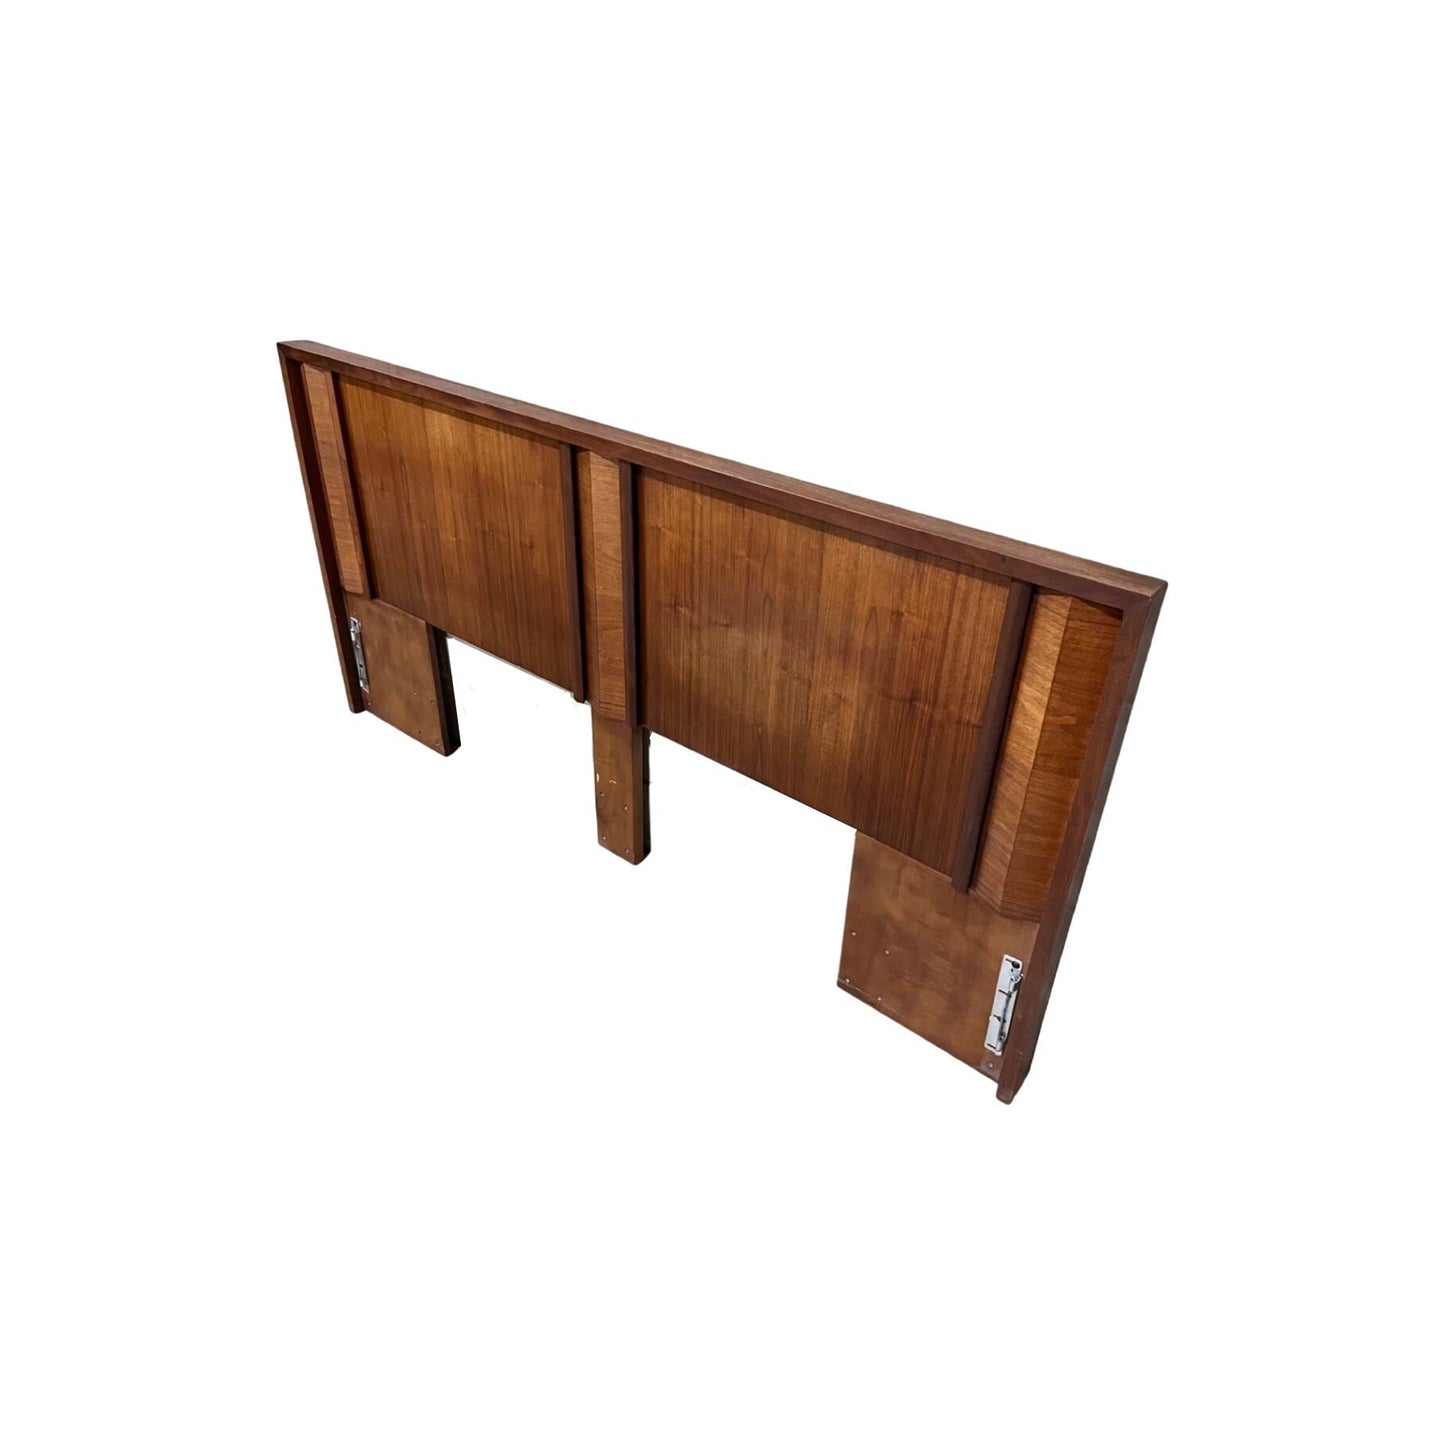 Captivating vintage brutalist headboard from the 1970s with minimalist yet strong aesthetic